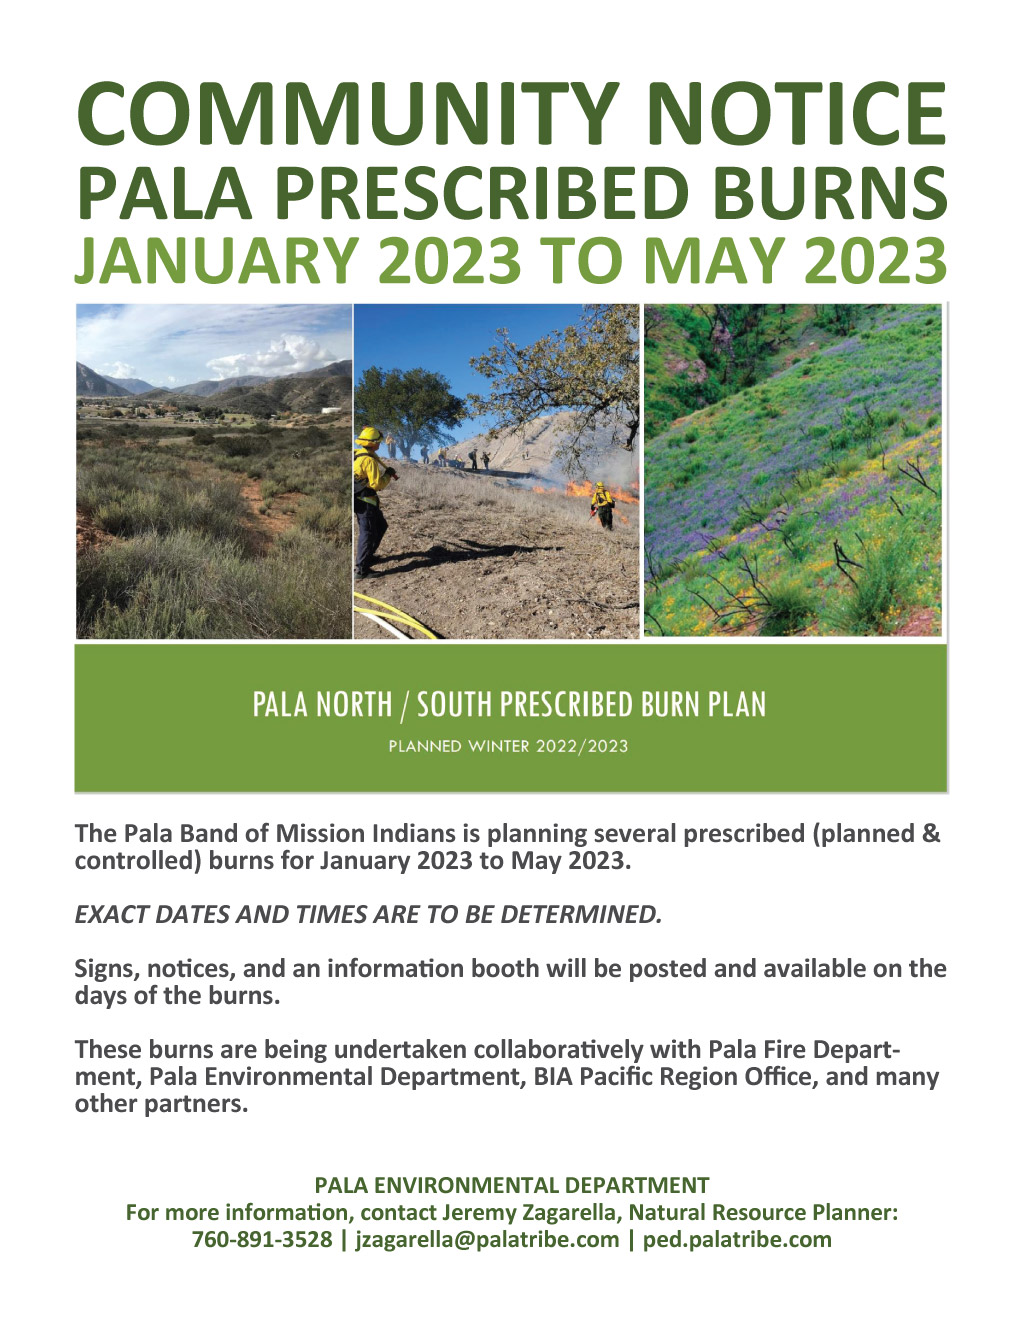 Pala Environmental Department PED Pala Band of Mission Indians PBMI Pala Fire Deparment Bureau of Indian Affairs BIA Fire Manamange Prescribed Burns